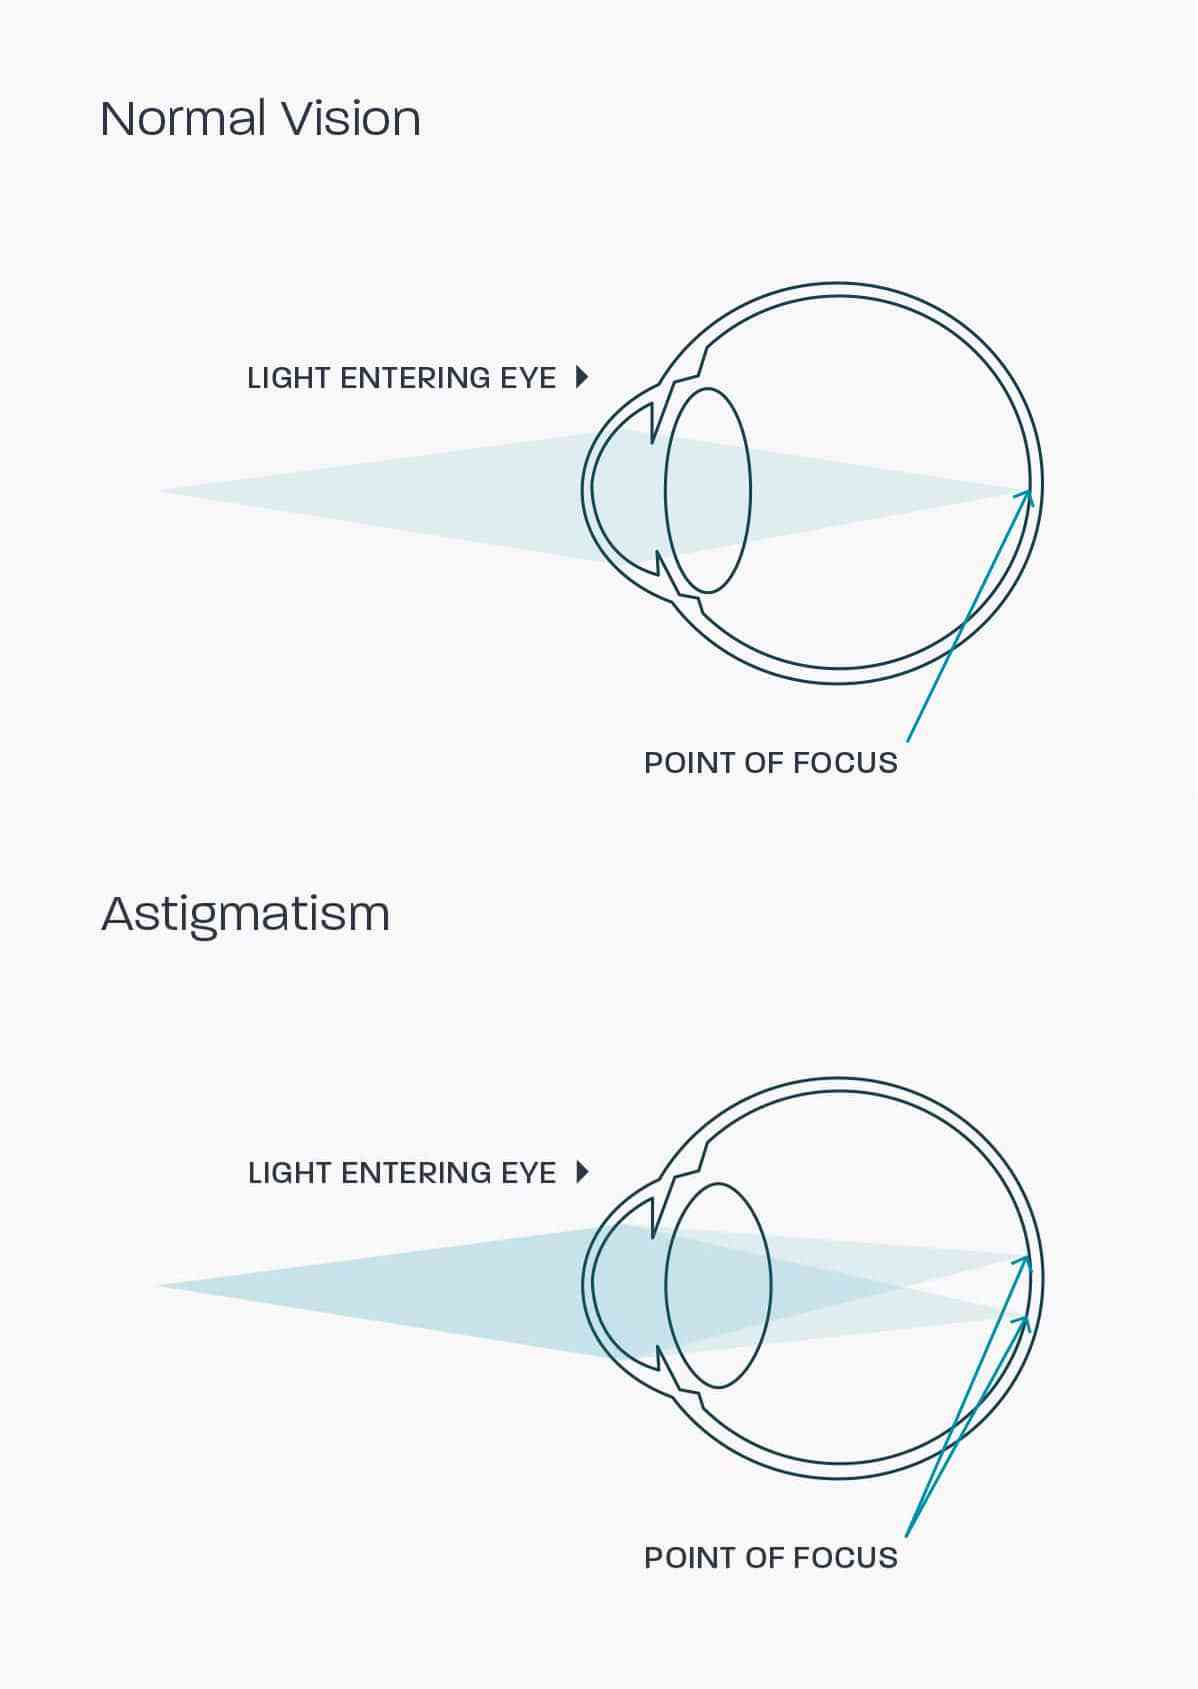 A graphic showing how astigmatism affects the eye